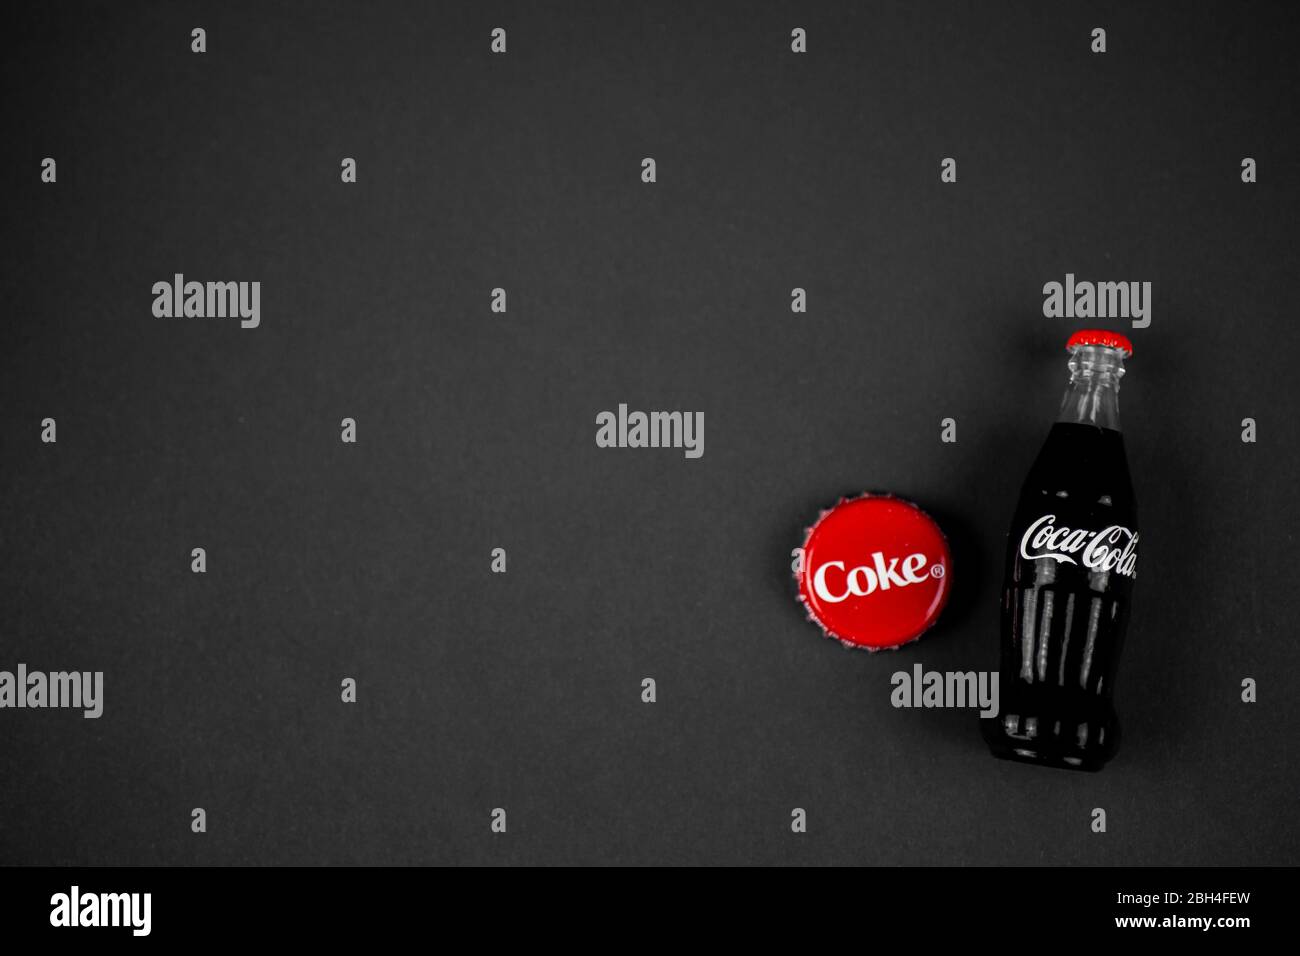 Download Coca Cola Bottle High Resolution Stock Photography And Images Alamy Yellowimages Mockups